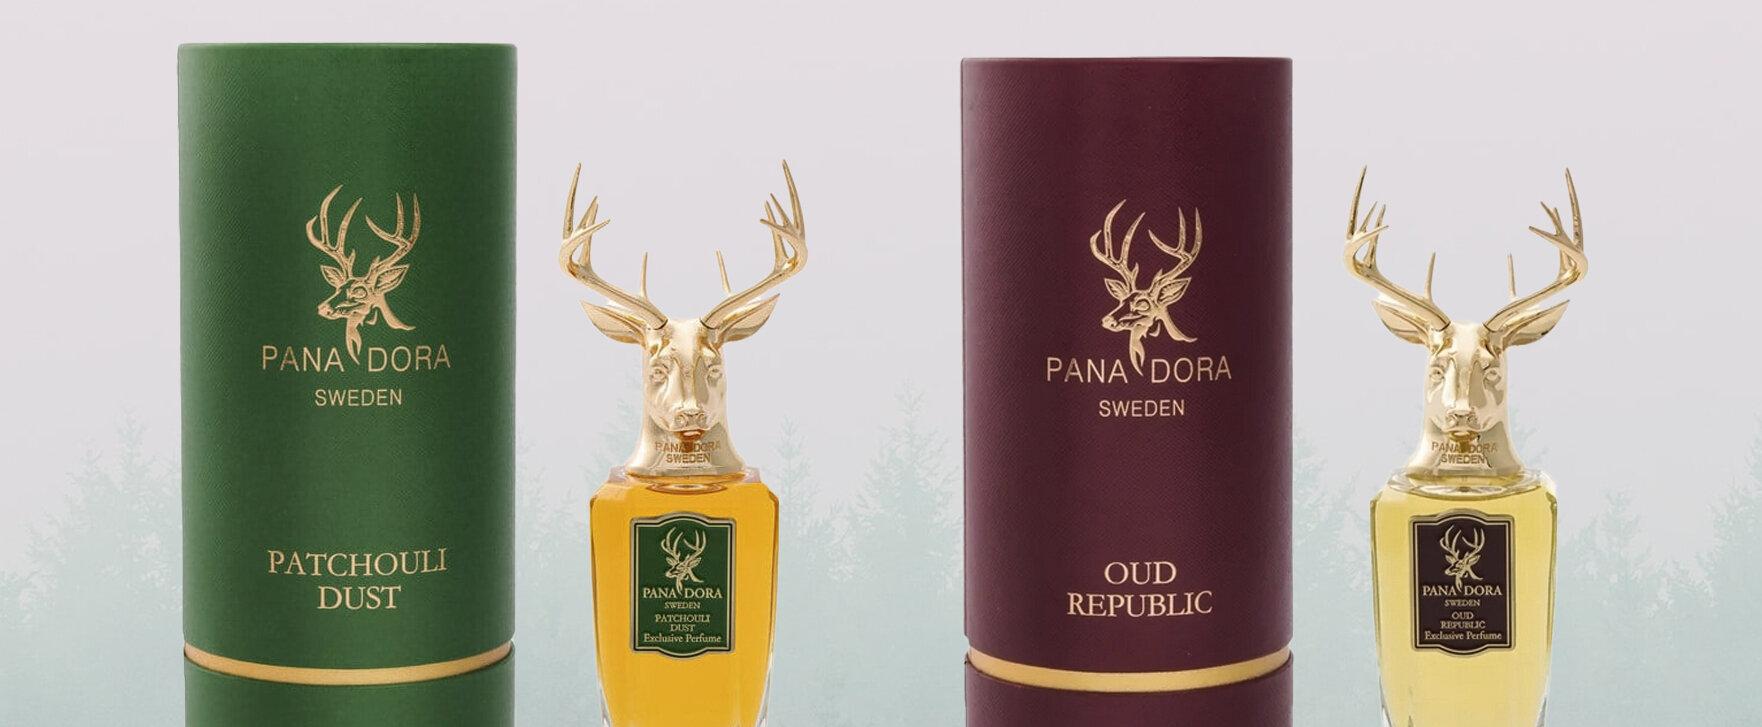 Pana Dora’s New Fragrances: “Patchouli Dust” and “Oud Republic” Inspired by Sweden’s Nature